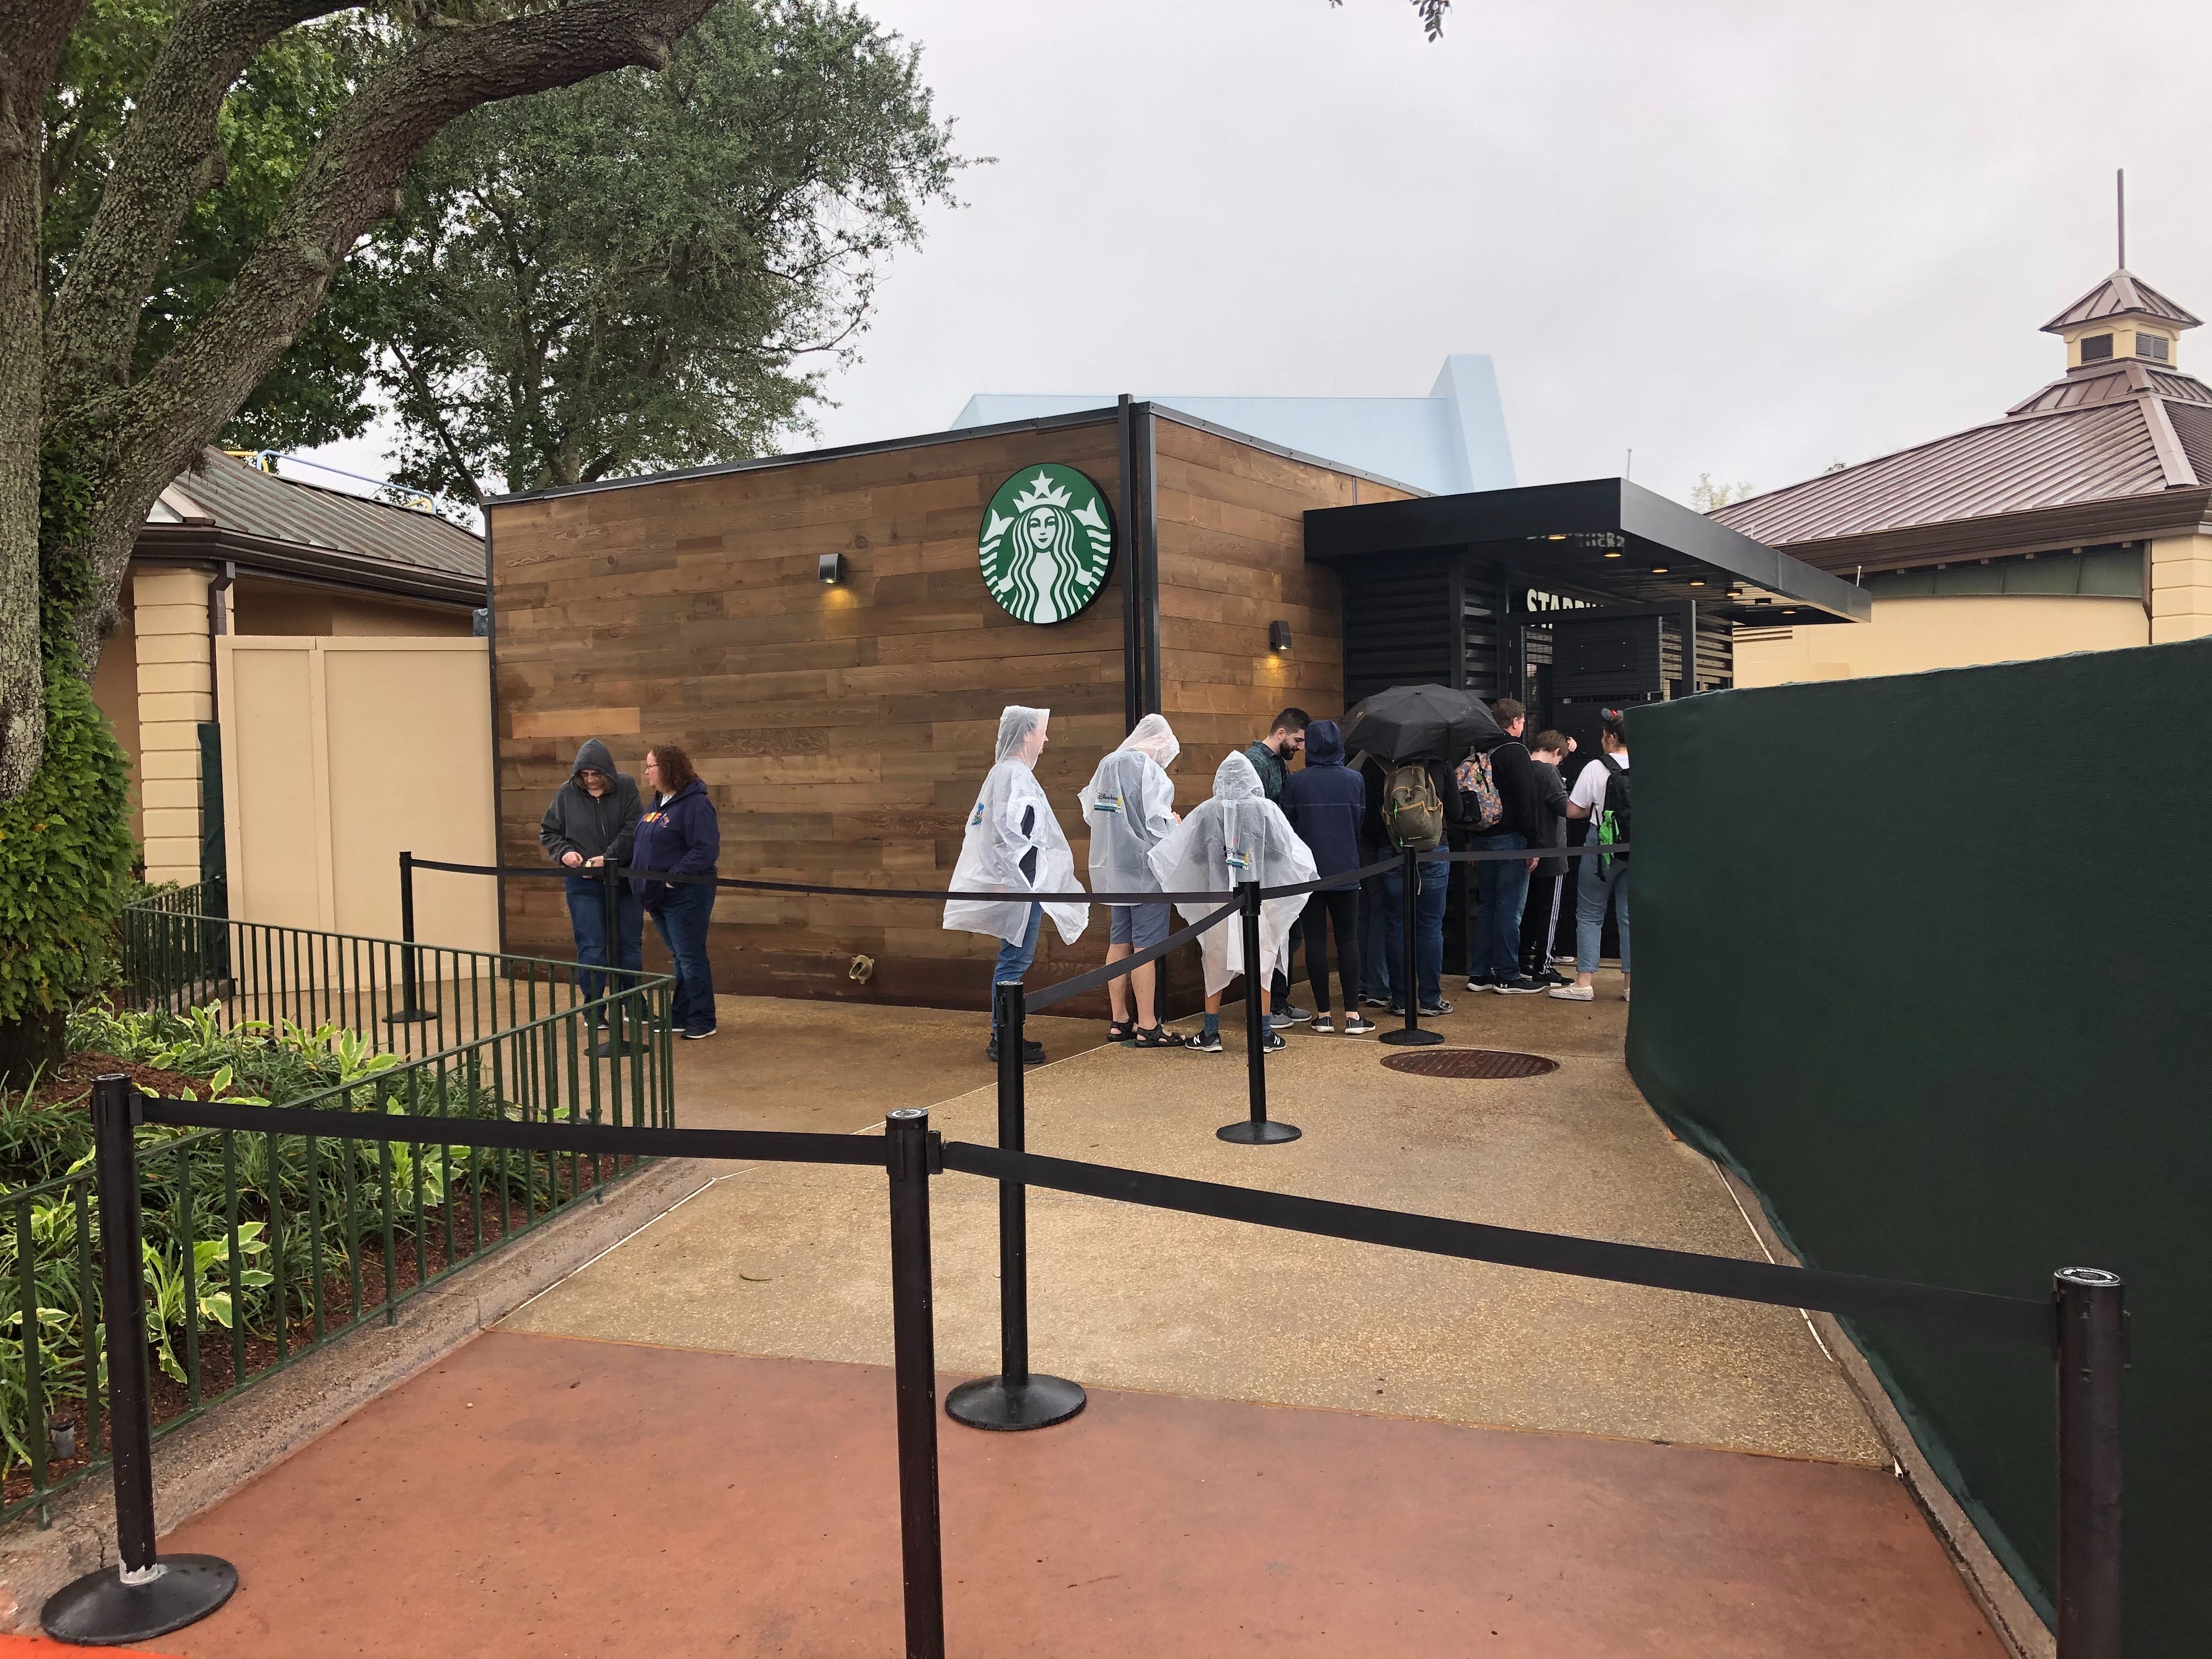 PHOTOS, VIDEO New Starbucks "Traveler's Cafe" Now Officially Open at